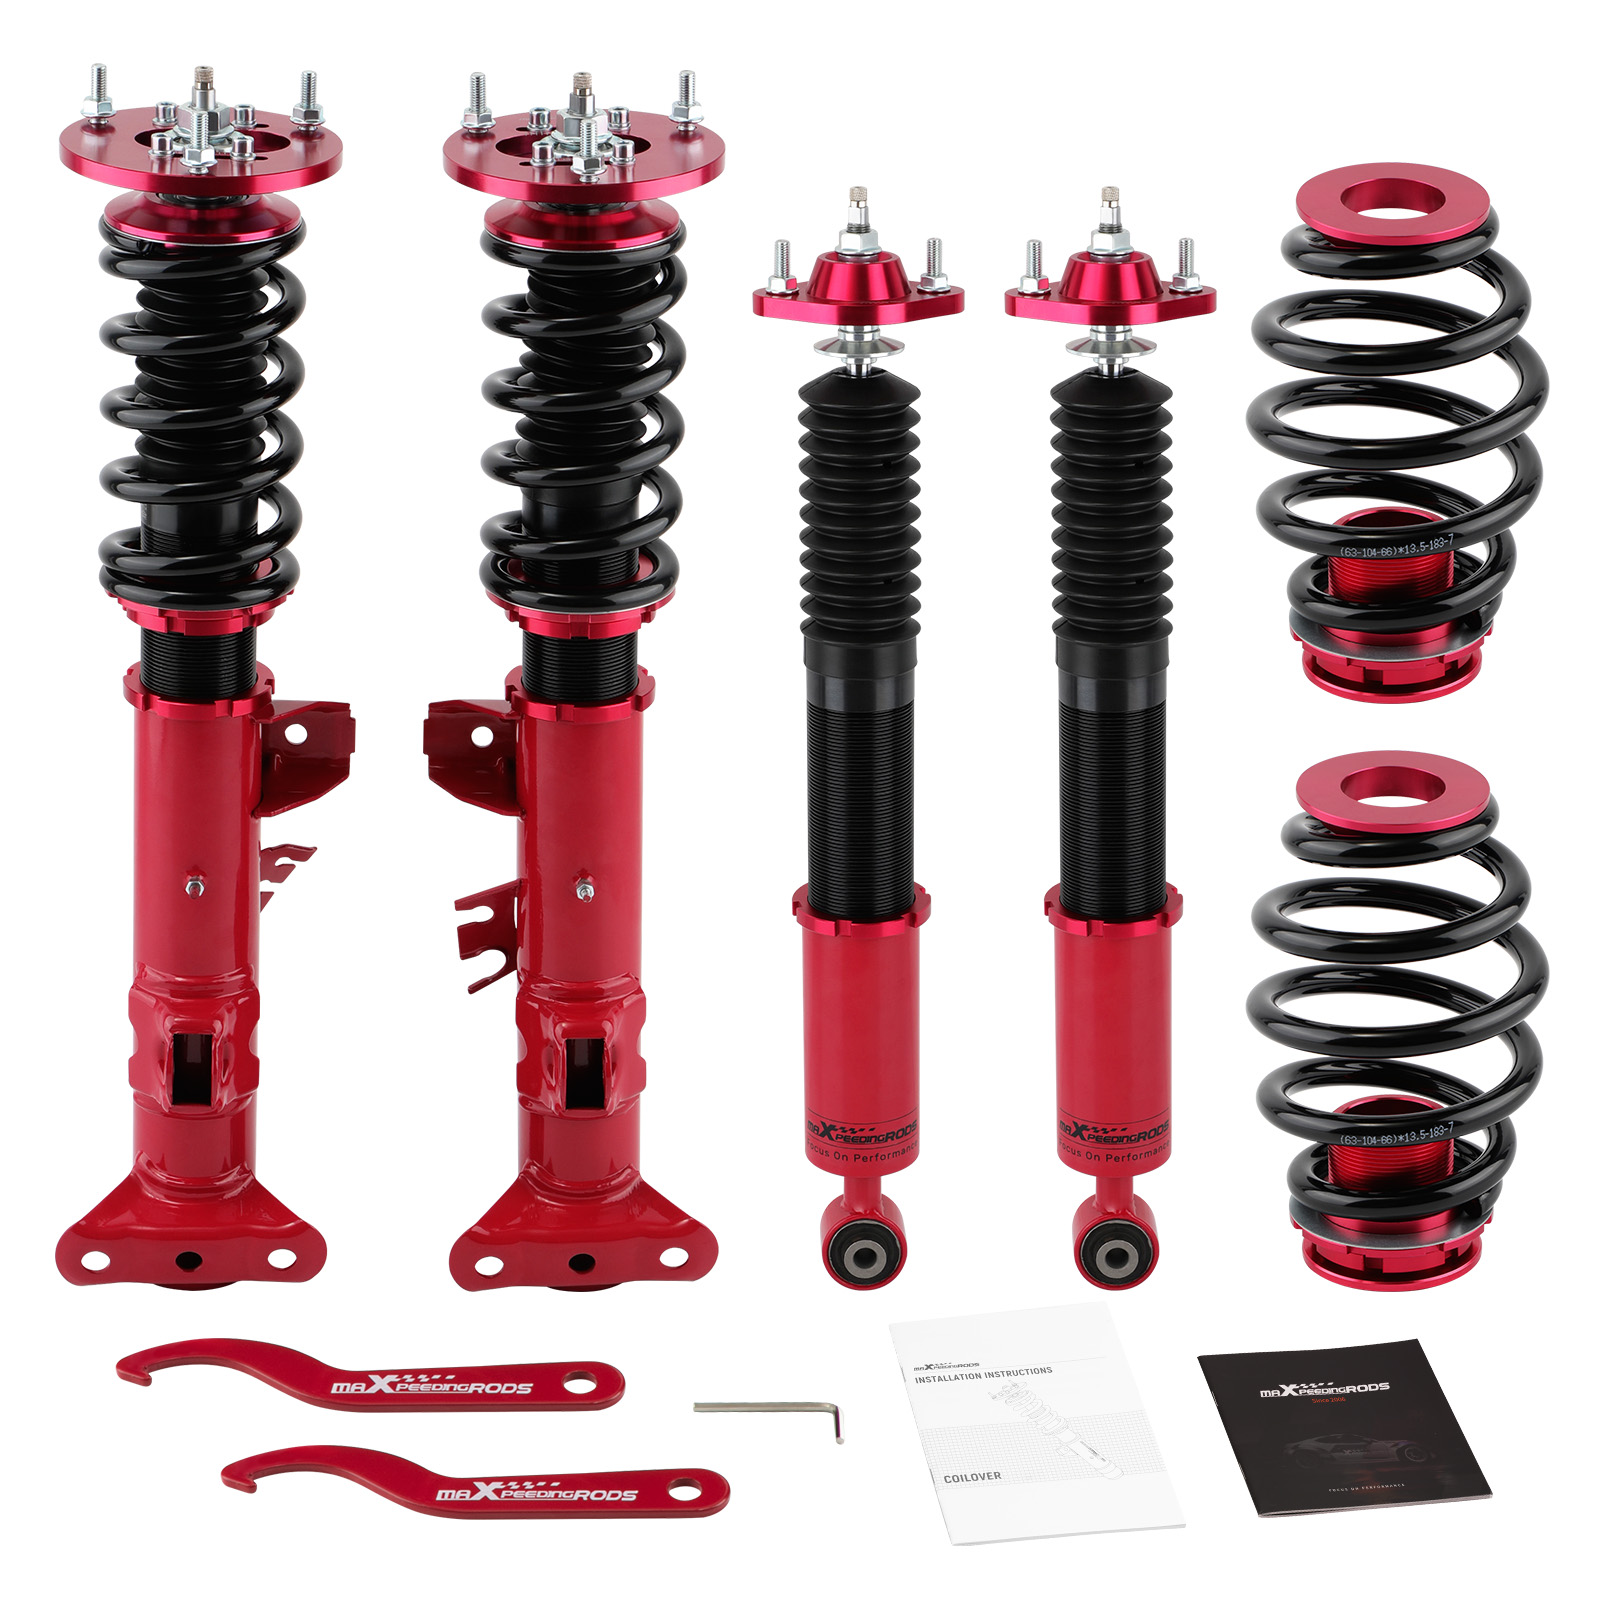 Maxpeedingrods Full Assembly Coilovers suspension kits compatible